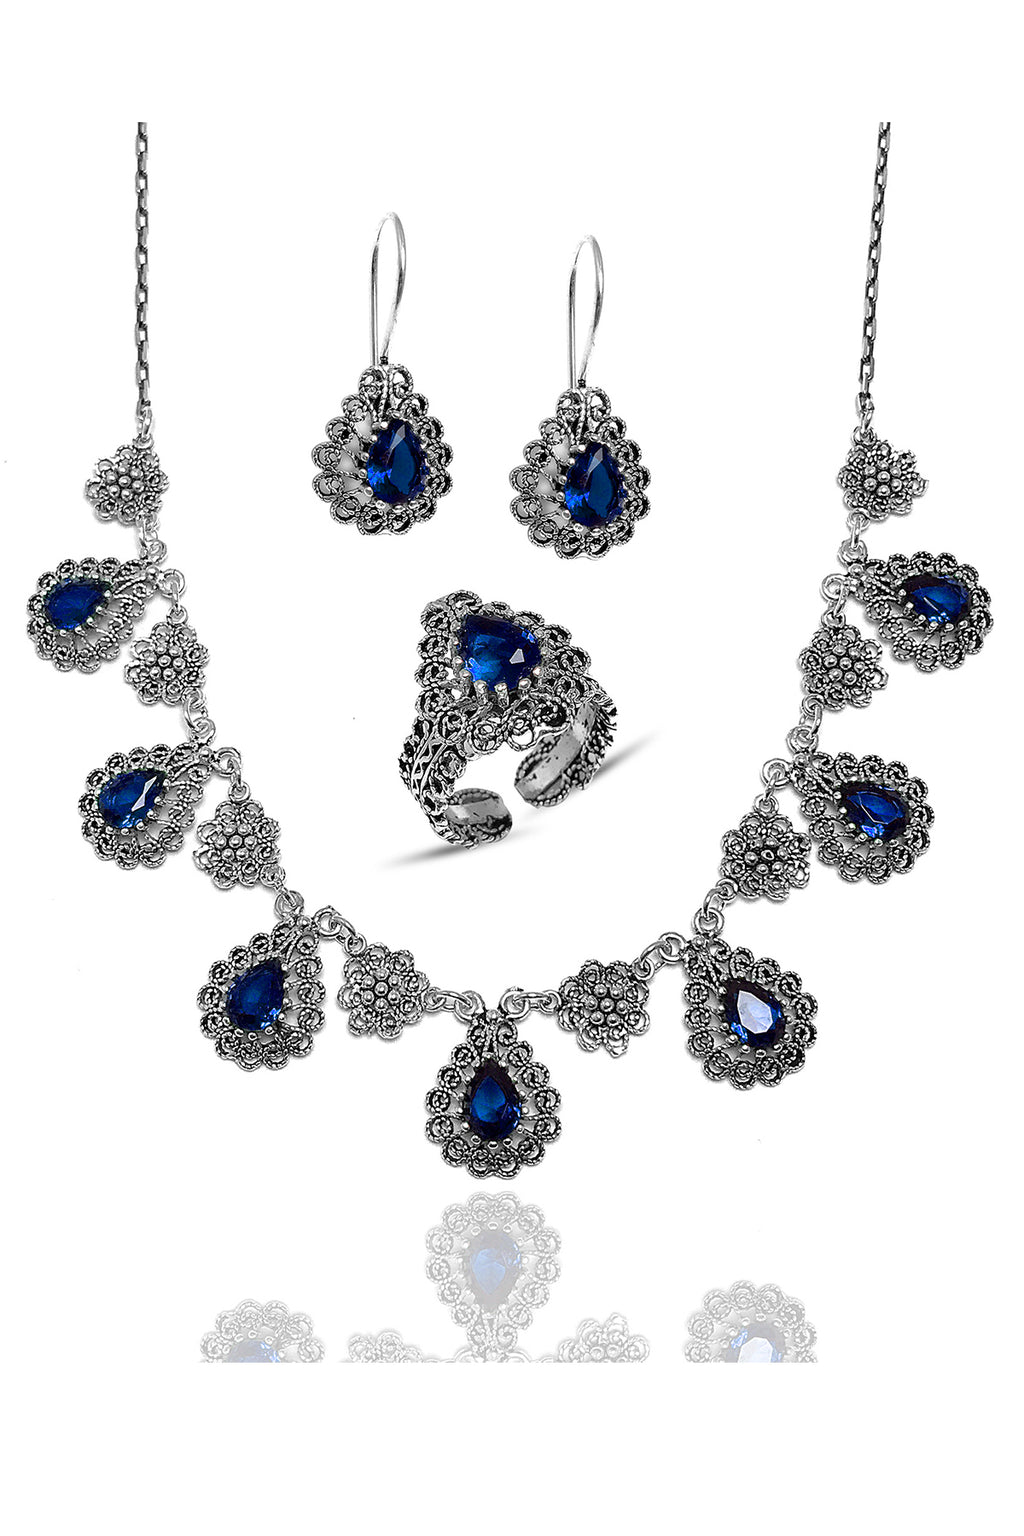 Drop Model Filigree Silver Triple Jewelry Set With Sapphire (NG201021803)